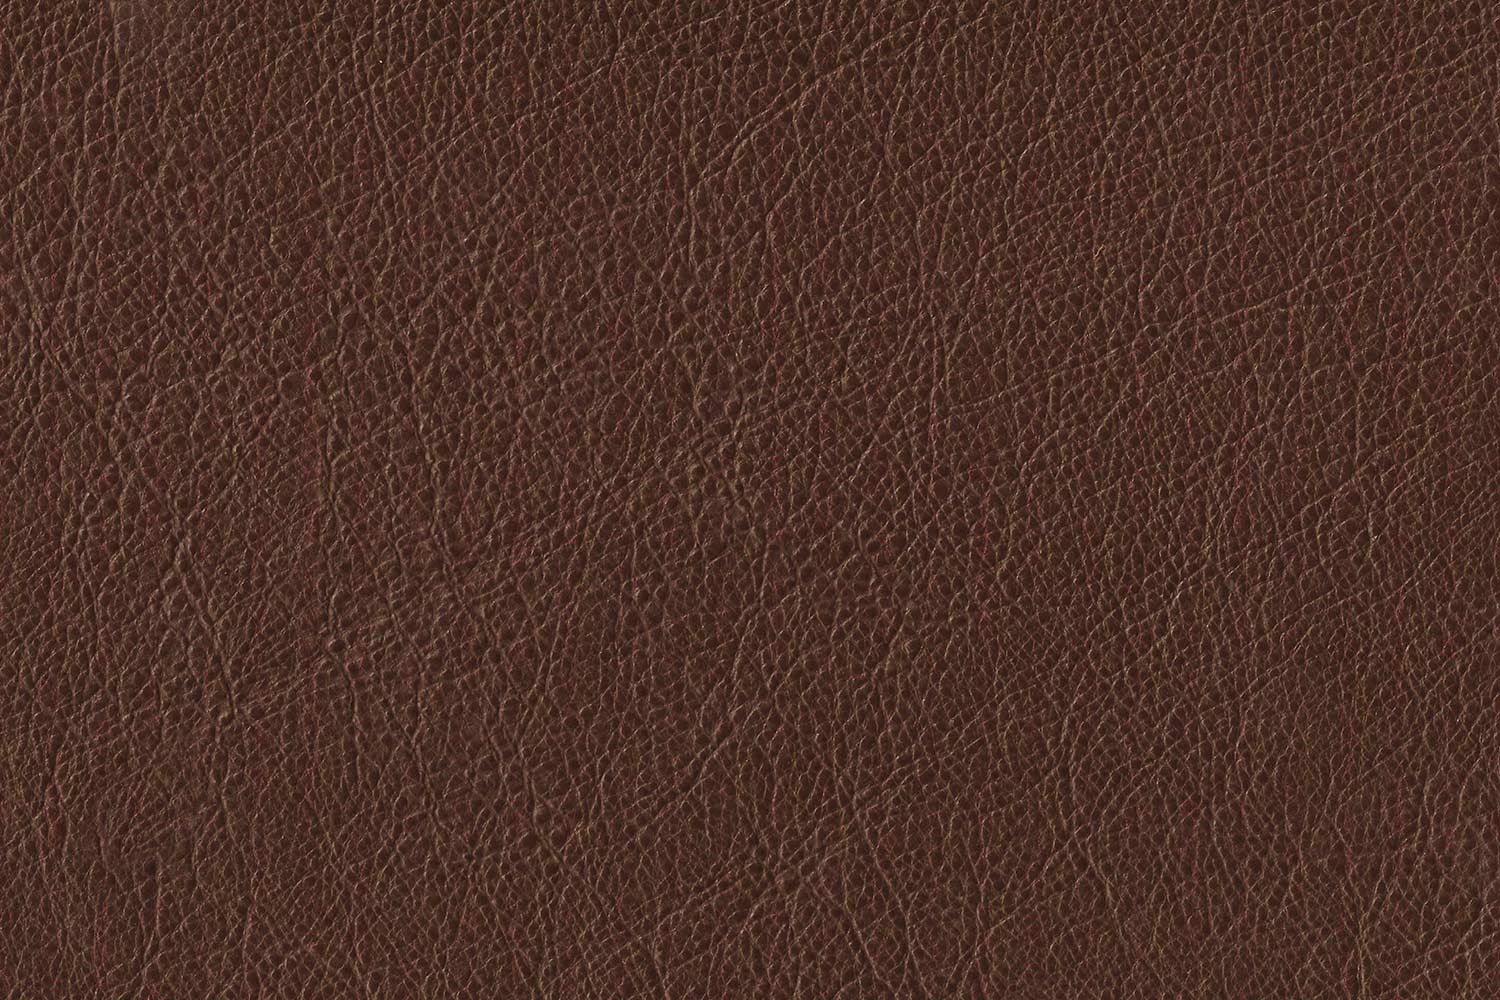 Wanderings Assorted Colors Leather Scraps for Leather Crafts – 3lbs Mixed Sizes, Shapes with 36 Cord - Full Grain Buffalo Leather Remnants from Journal Making